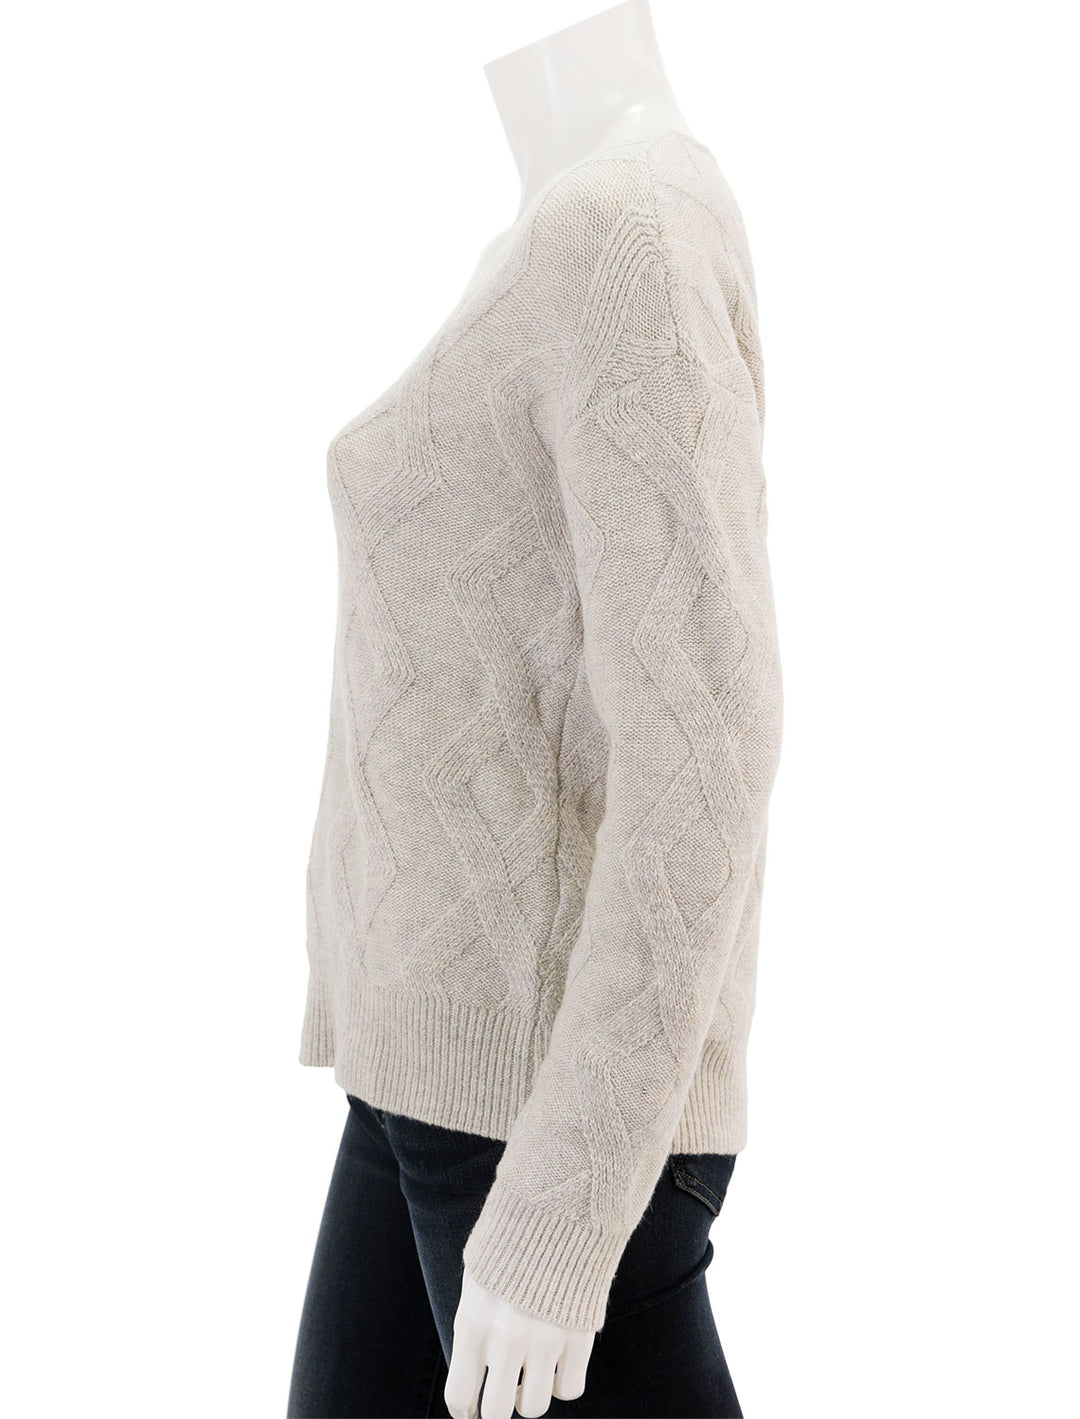 Side view of Splendid's diamond cable vneck sweater in oat heather.